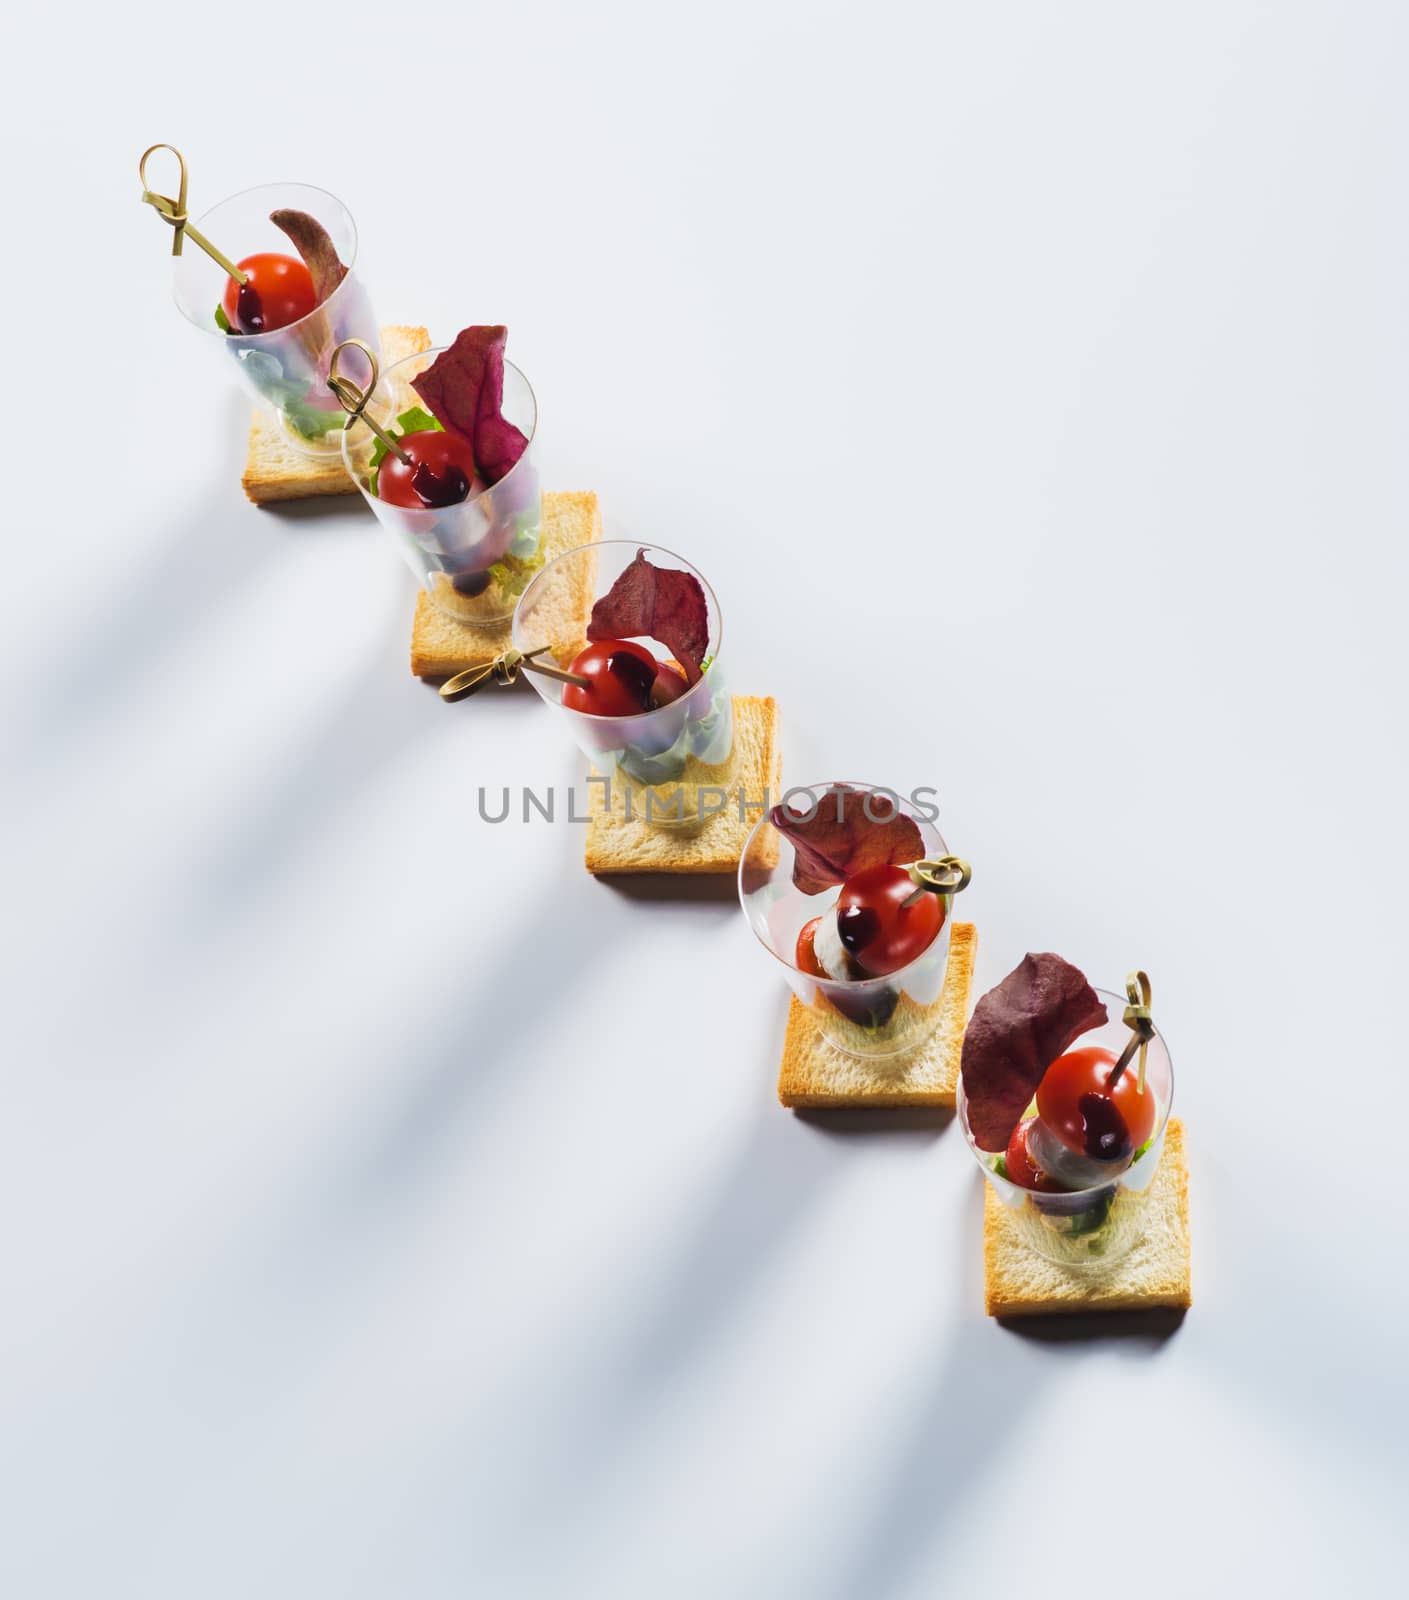 Canape with cherry-tomato and soft cheese on light background